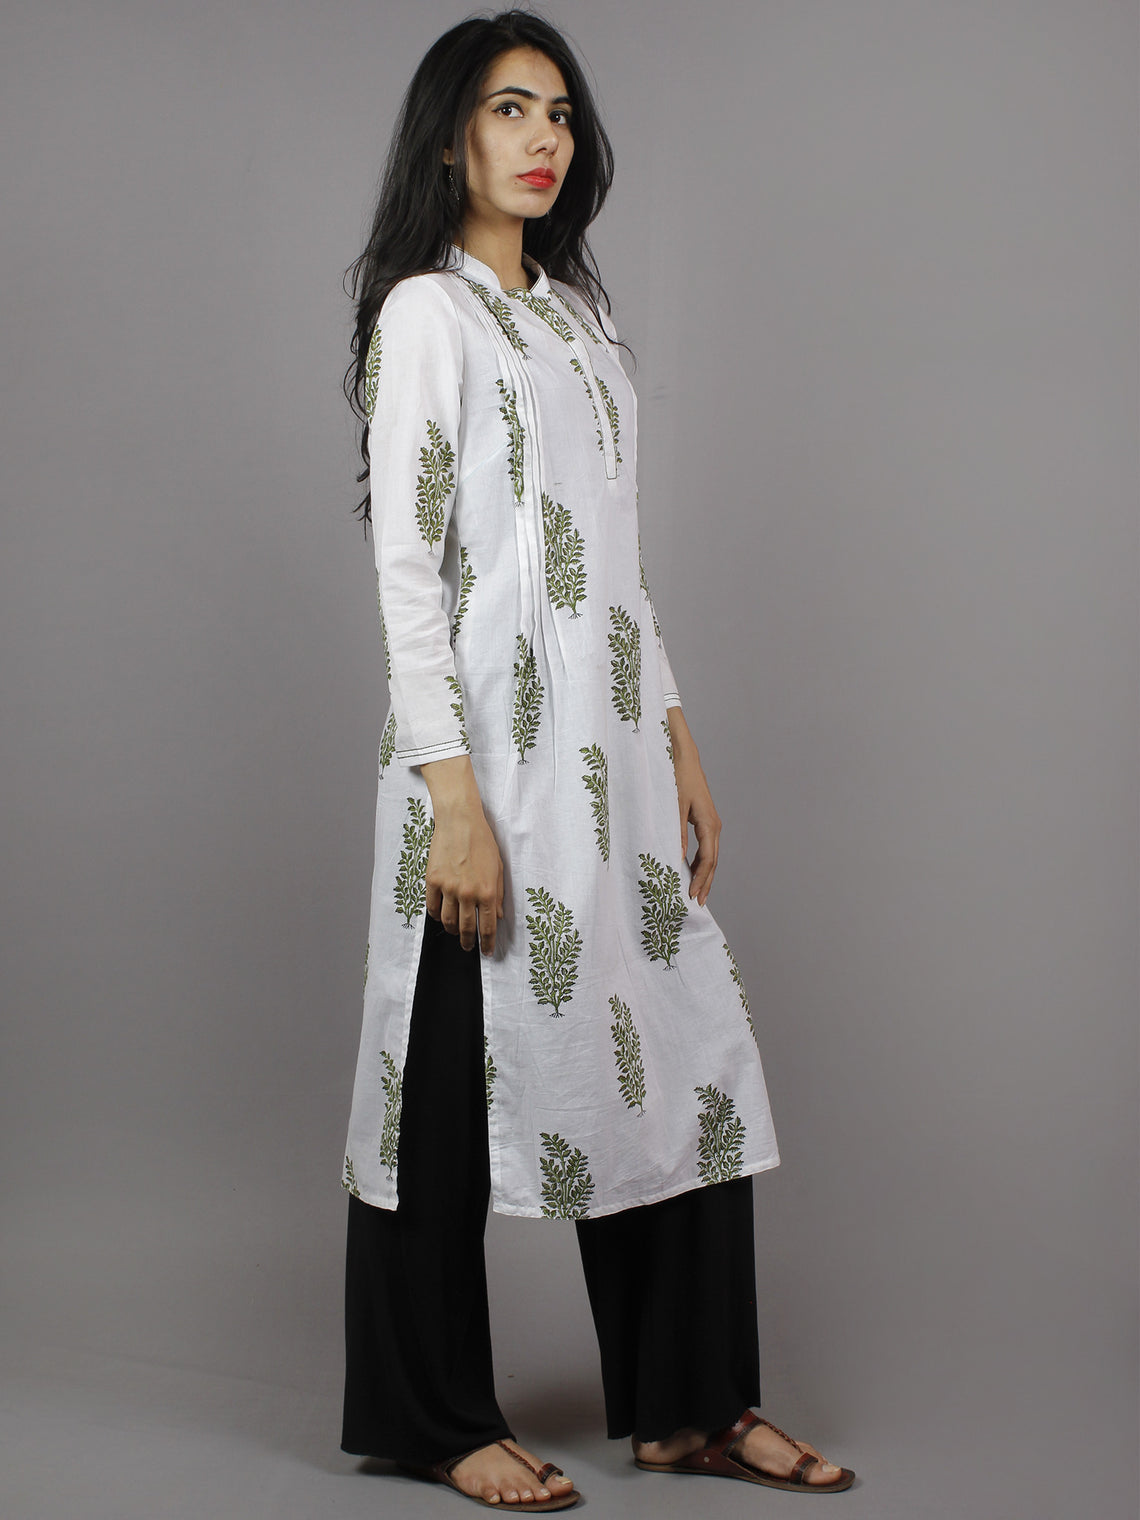 White Olive & Parrot Green Hand Block Printed Kurti With Stand Collar ...